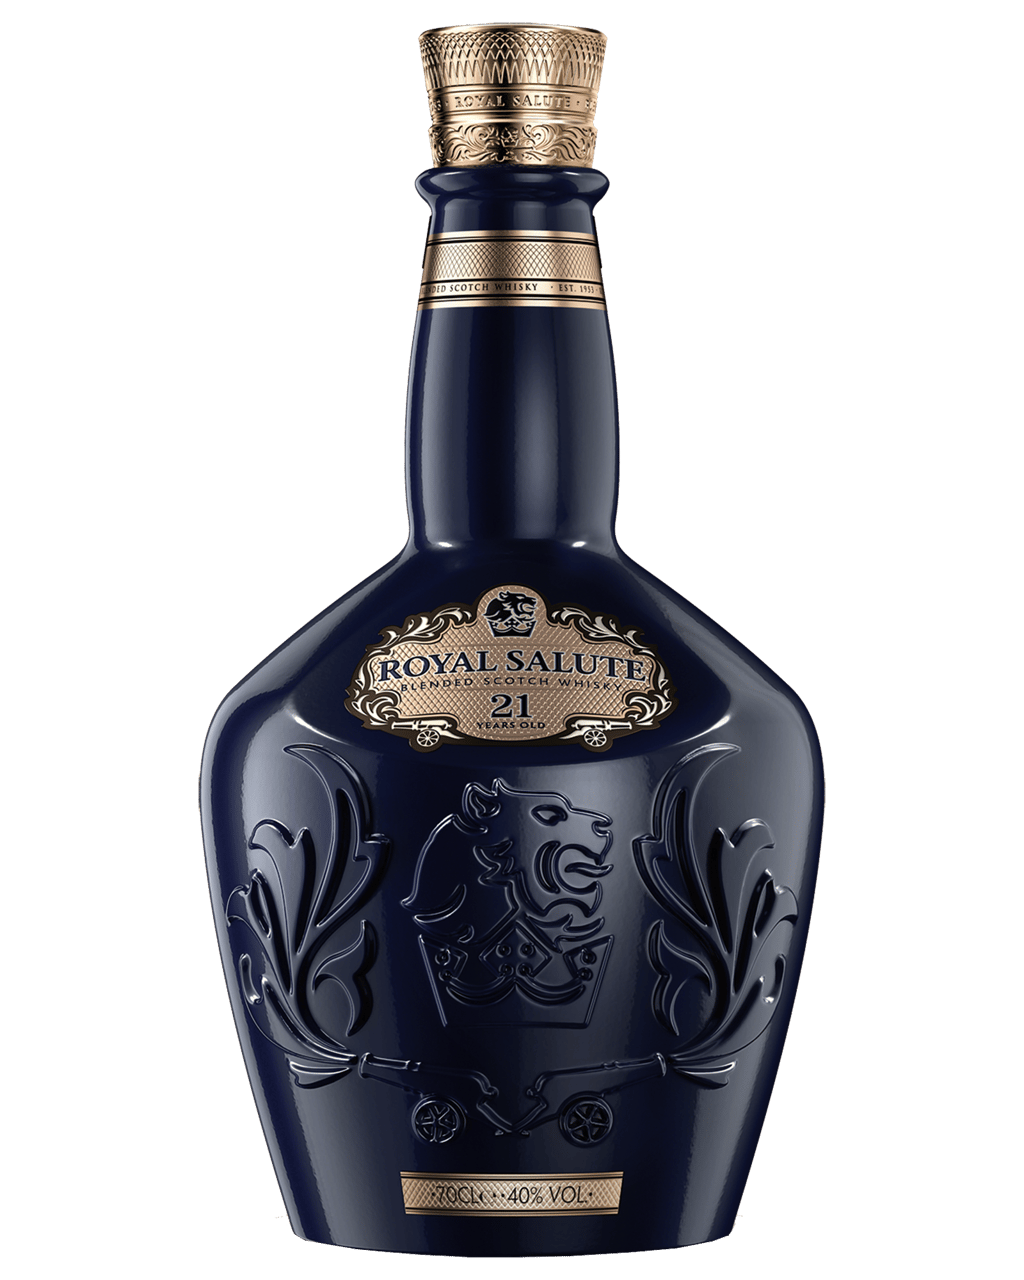 Buy Royal Salute 21 Year Old Blended Scotch Whisky 700Ml Online Or Near You  In Australia [With Same Day Delivery* & Best Offers] - Dan Murphy'S